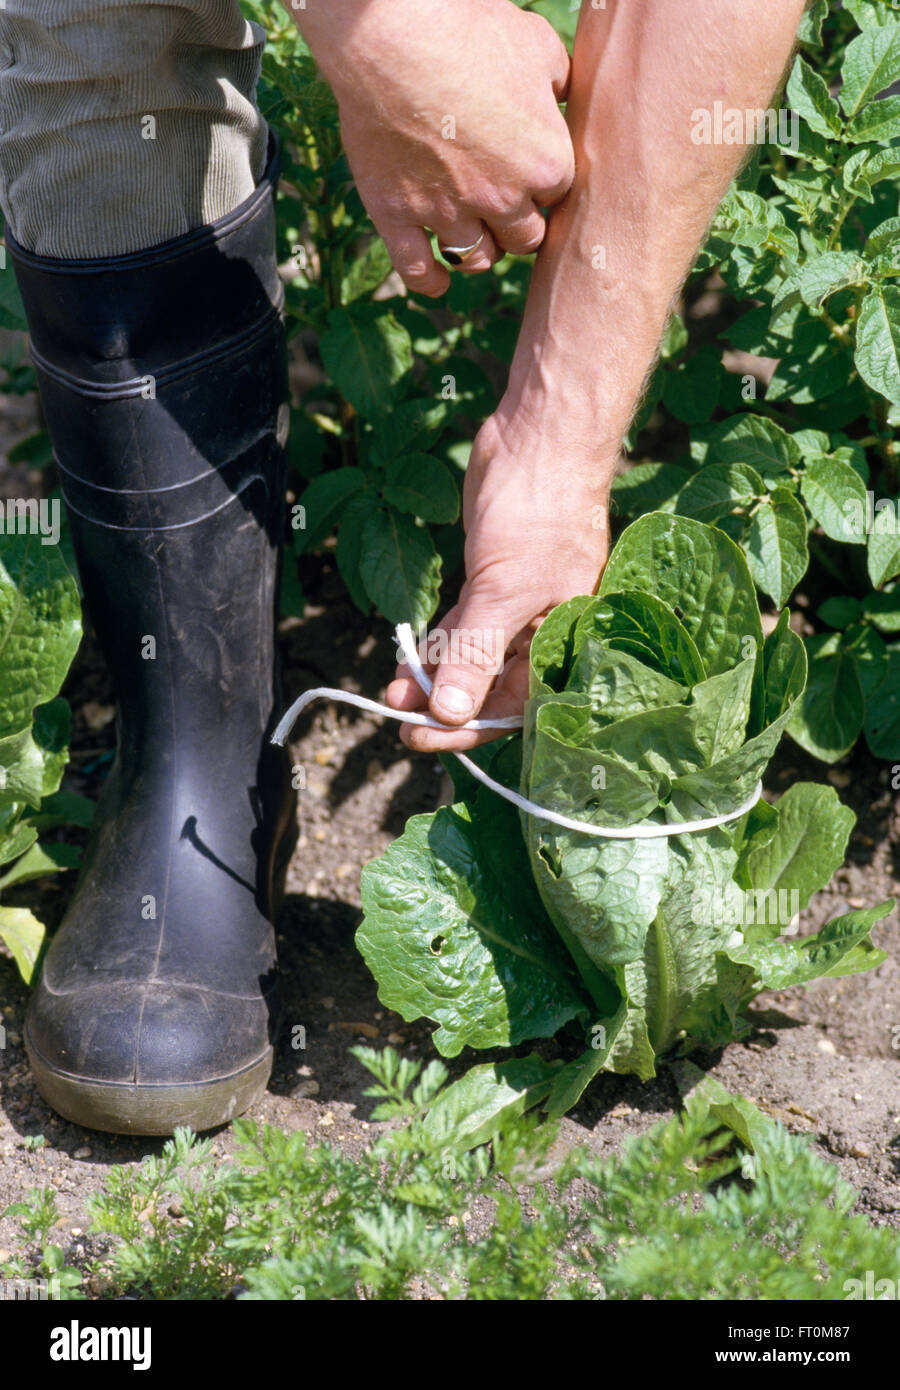 Close-up of a gardener tying up a cos lettuce with string Stock Photo